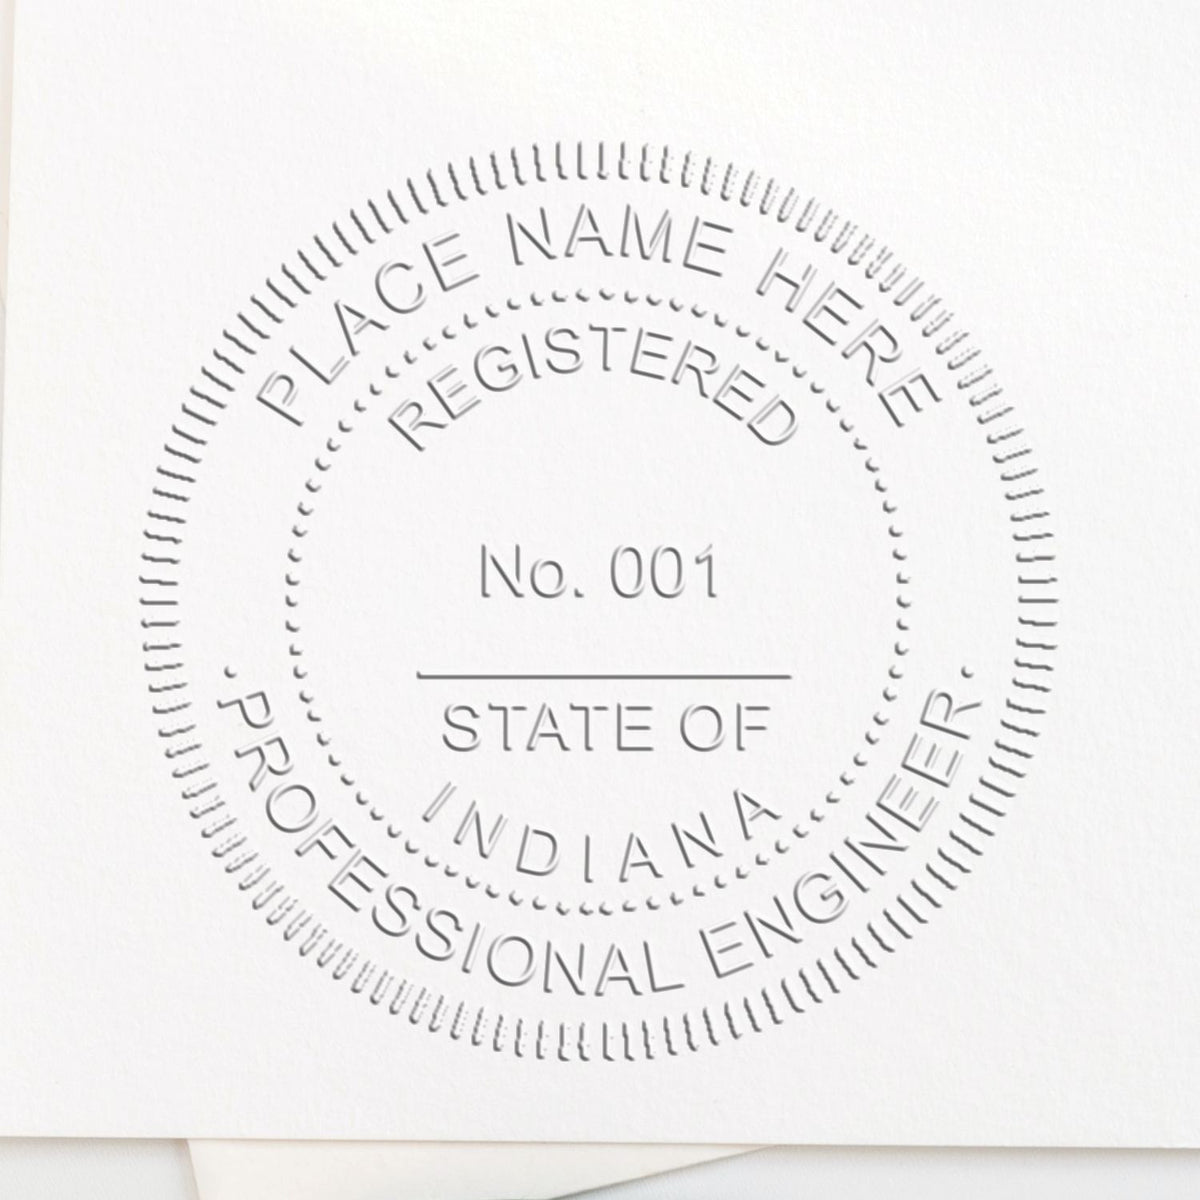 A photograph of the Indiana Engineer Desk Seal stamp impression reveals a vivid, professional image of the on paper.